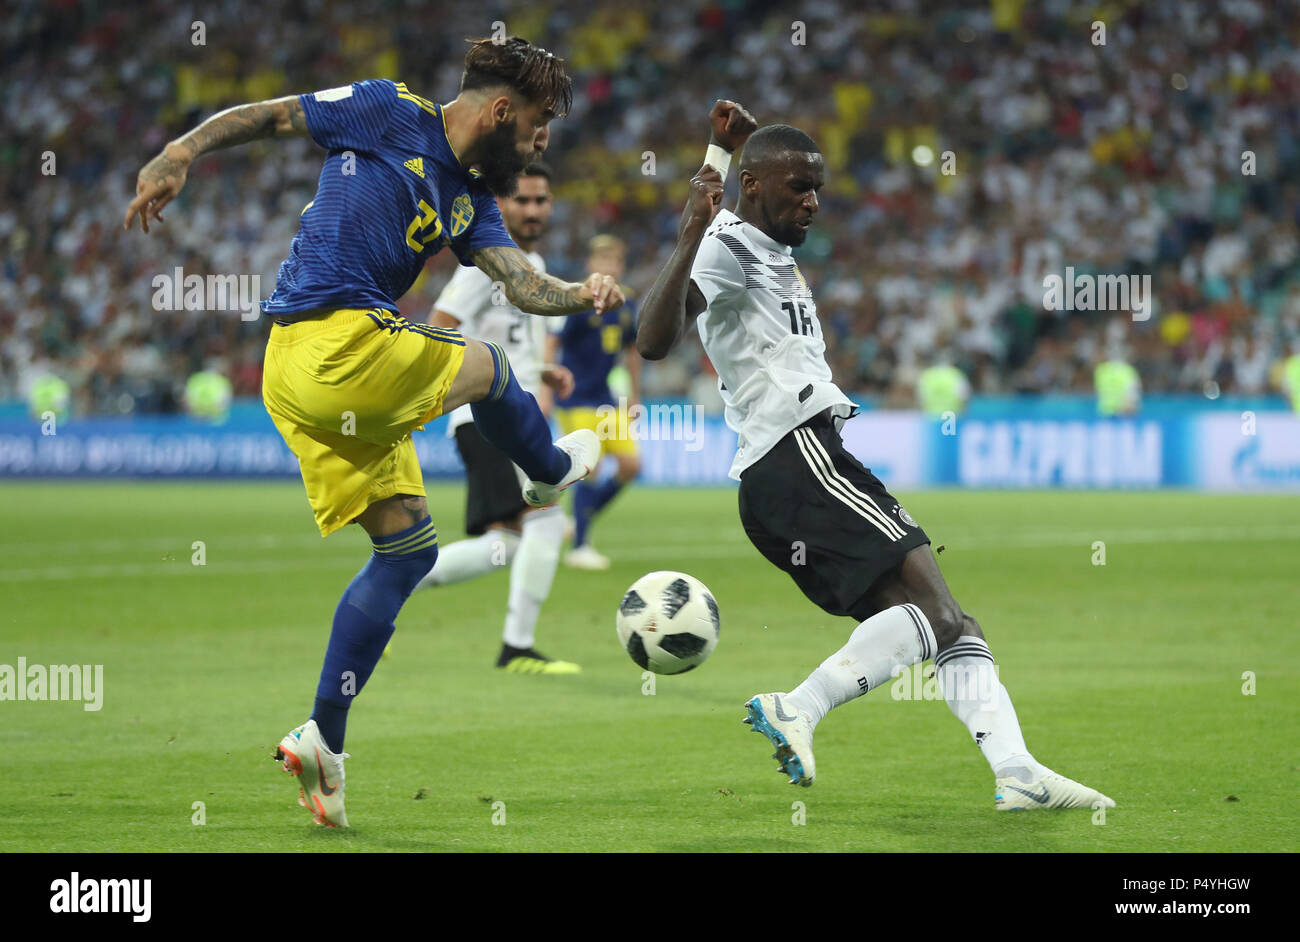 Sochi, Russia. 23rd June, 2018. Jimmy Durmaz (L) of Sweden vies with Antonio Ruediger of Germany during the 2018 FIFA World Cup Group F match between Germany and Sweden in Sochi, Russia, June 23, 2018. Germany won 2-1. Credit: Fei Maohua/Xinhua/Alamy Live News Stock Photo